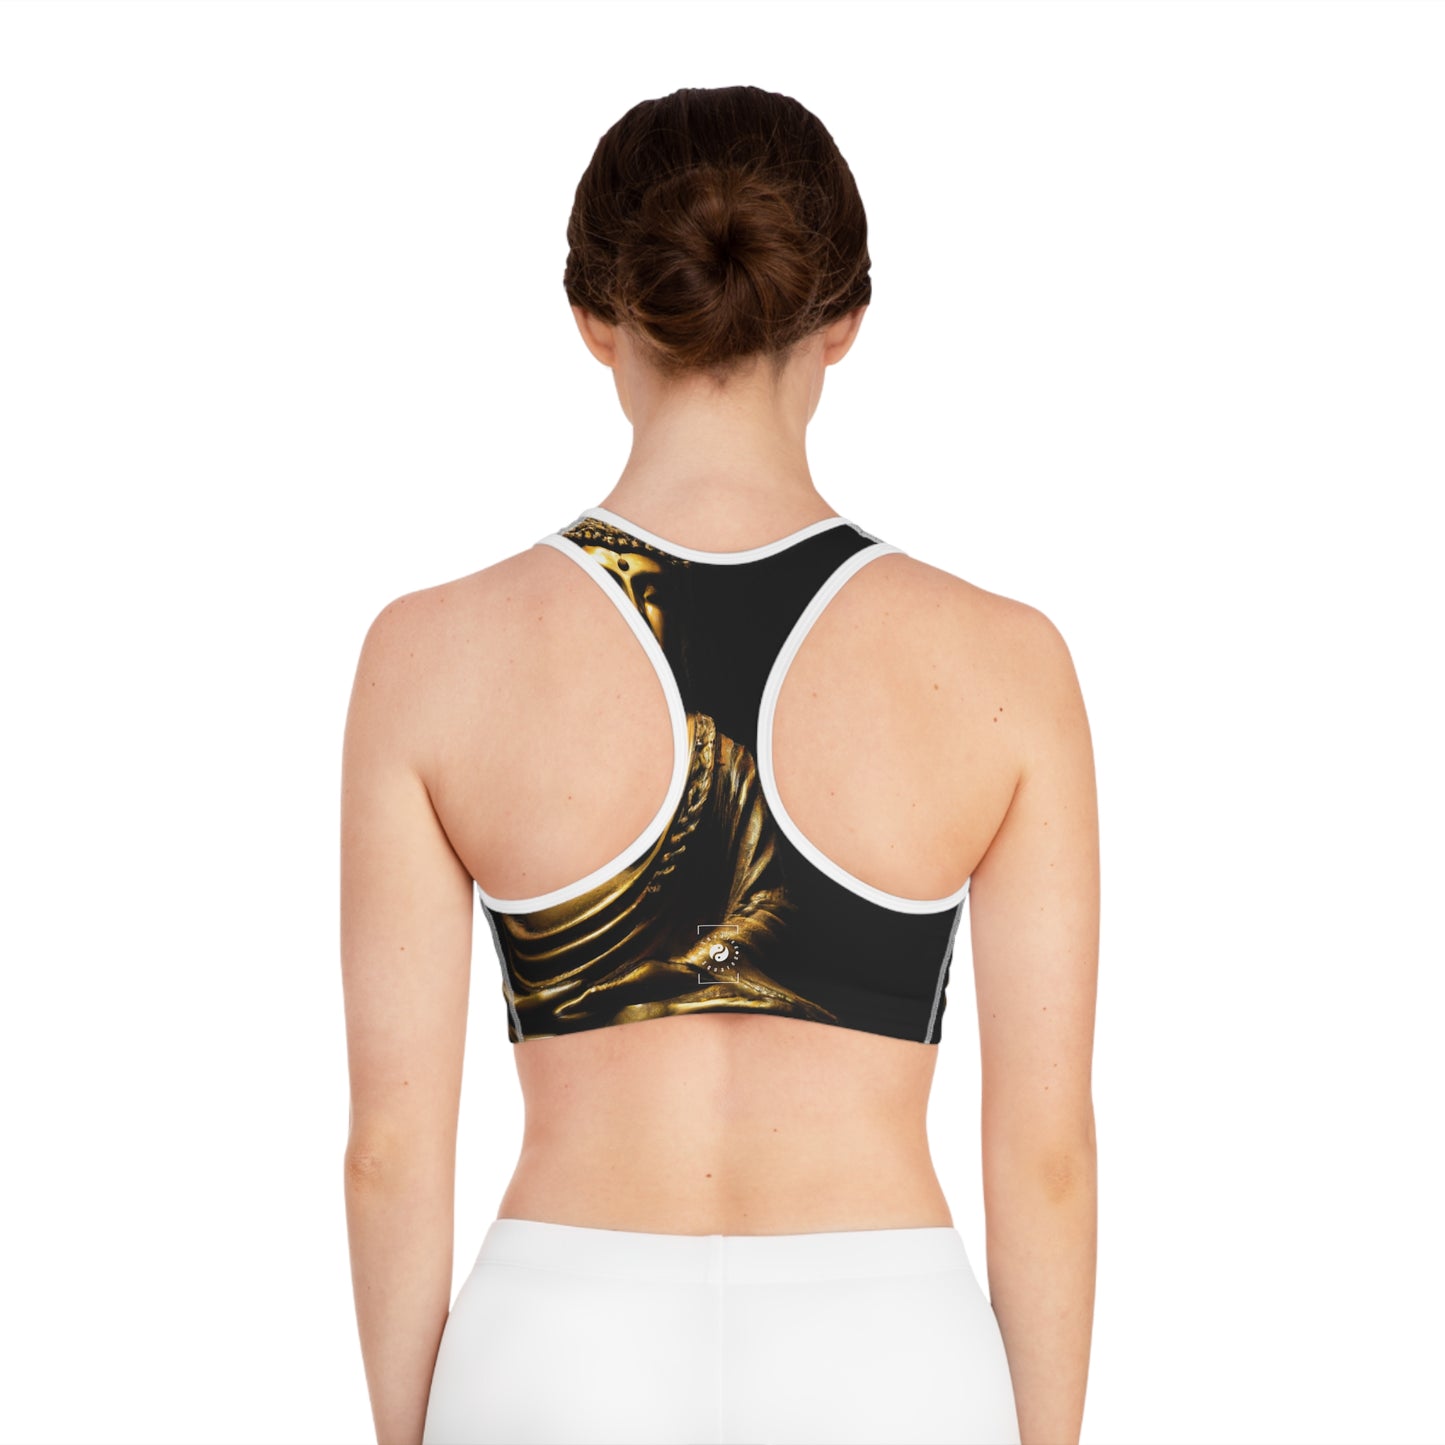 Lucien Fontaine - High Performance Sports Bra